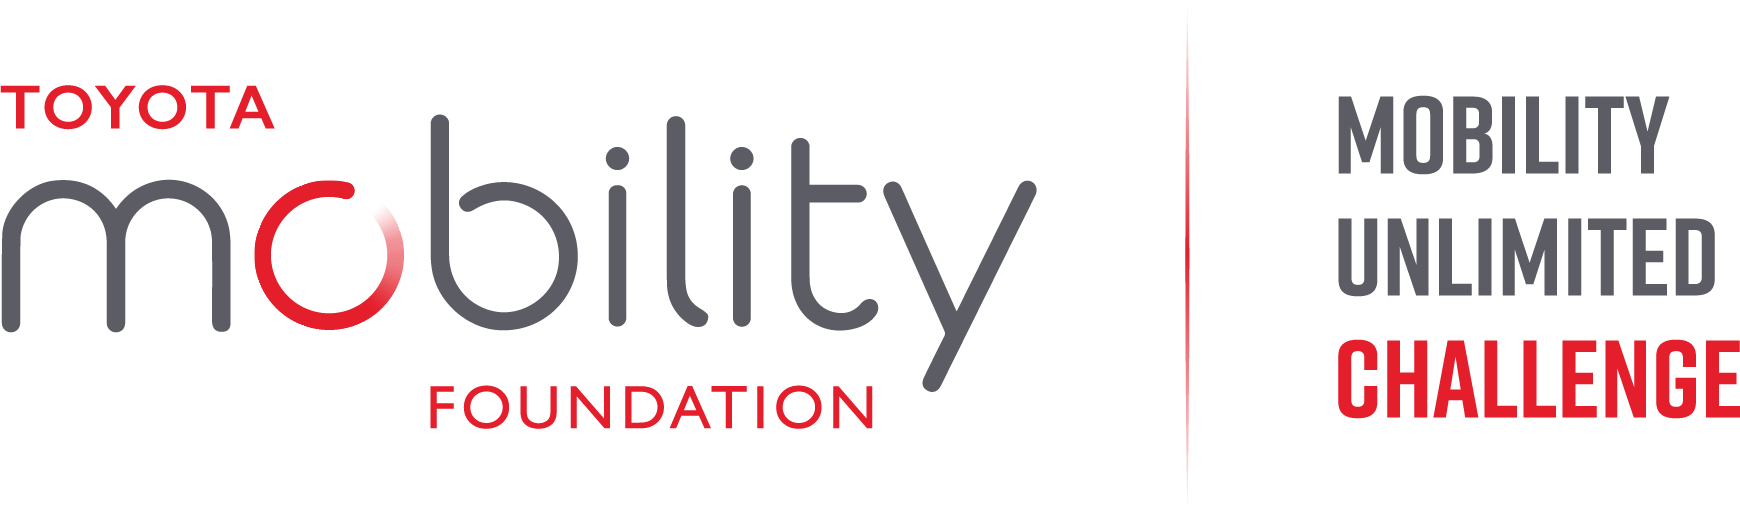 A M Mobility Logo - The Mobility Unlimited Challenge | Toyota Mobility Foundation ...